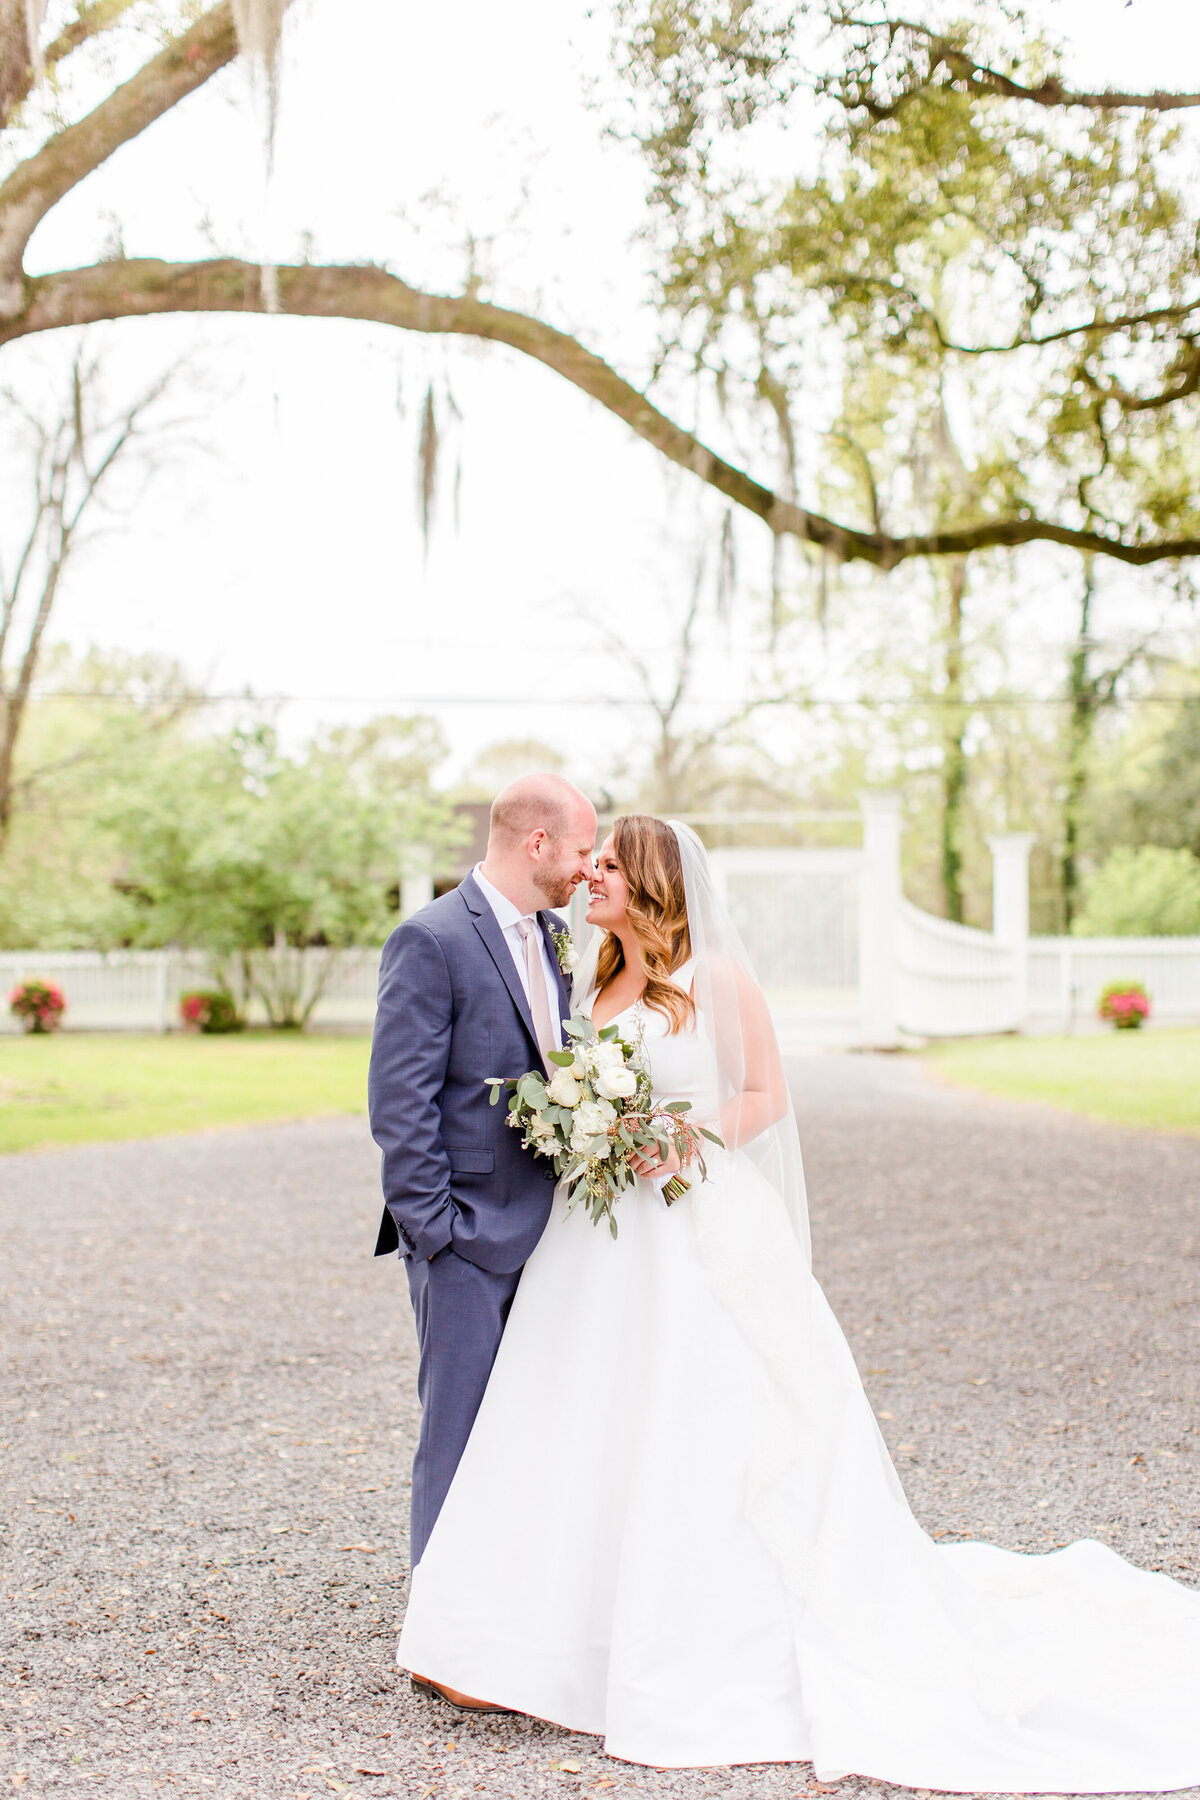 Renee Lorio Photography South Louisiana Wedding Engagement Light Airy Portrait Photographer Photos Southern Clean Colorful13